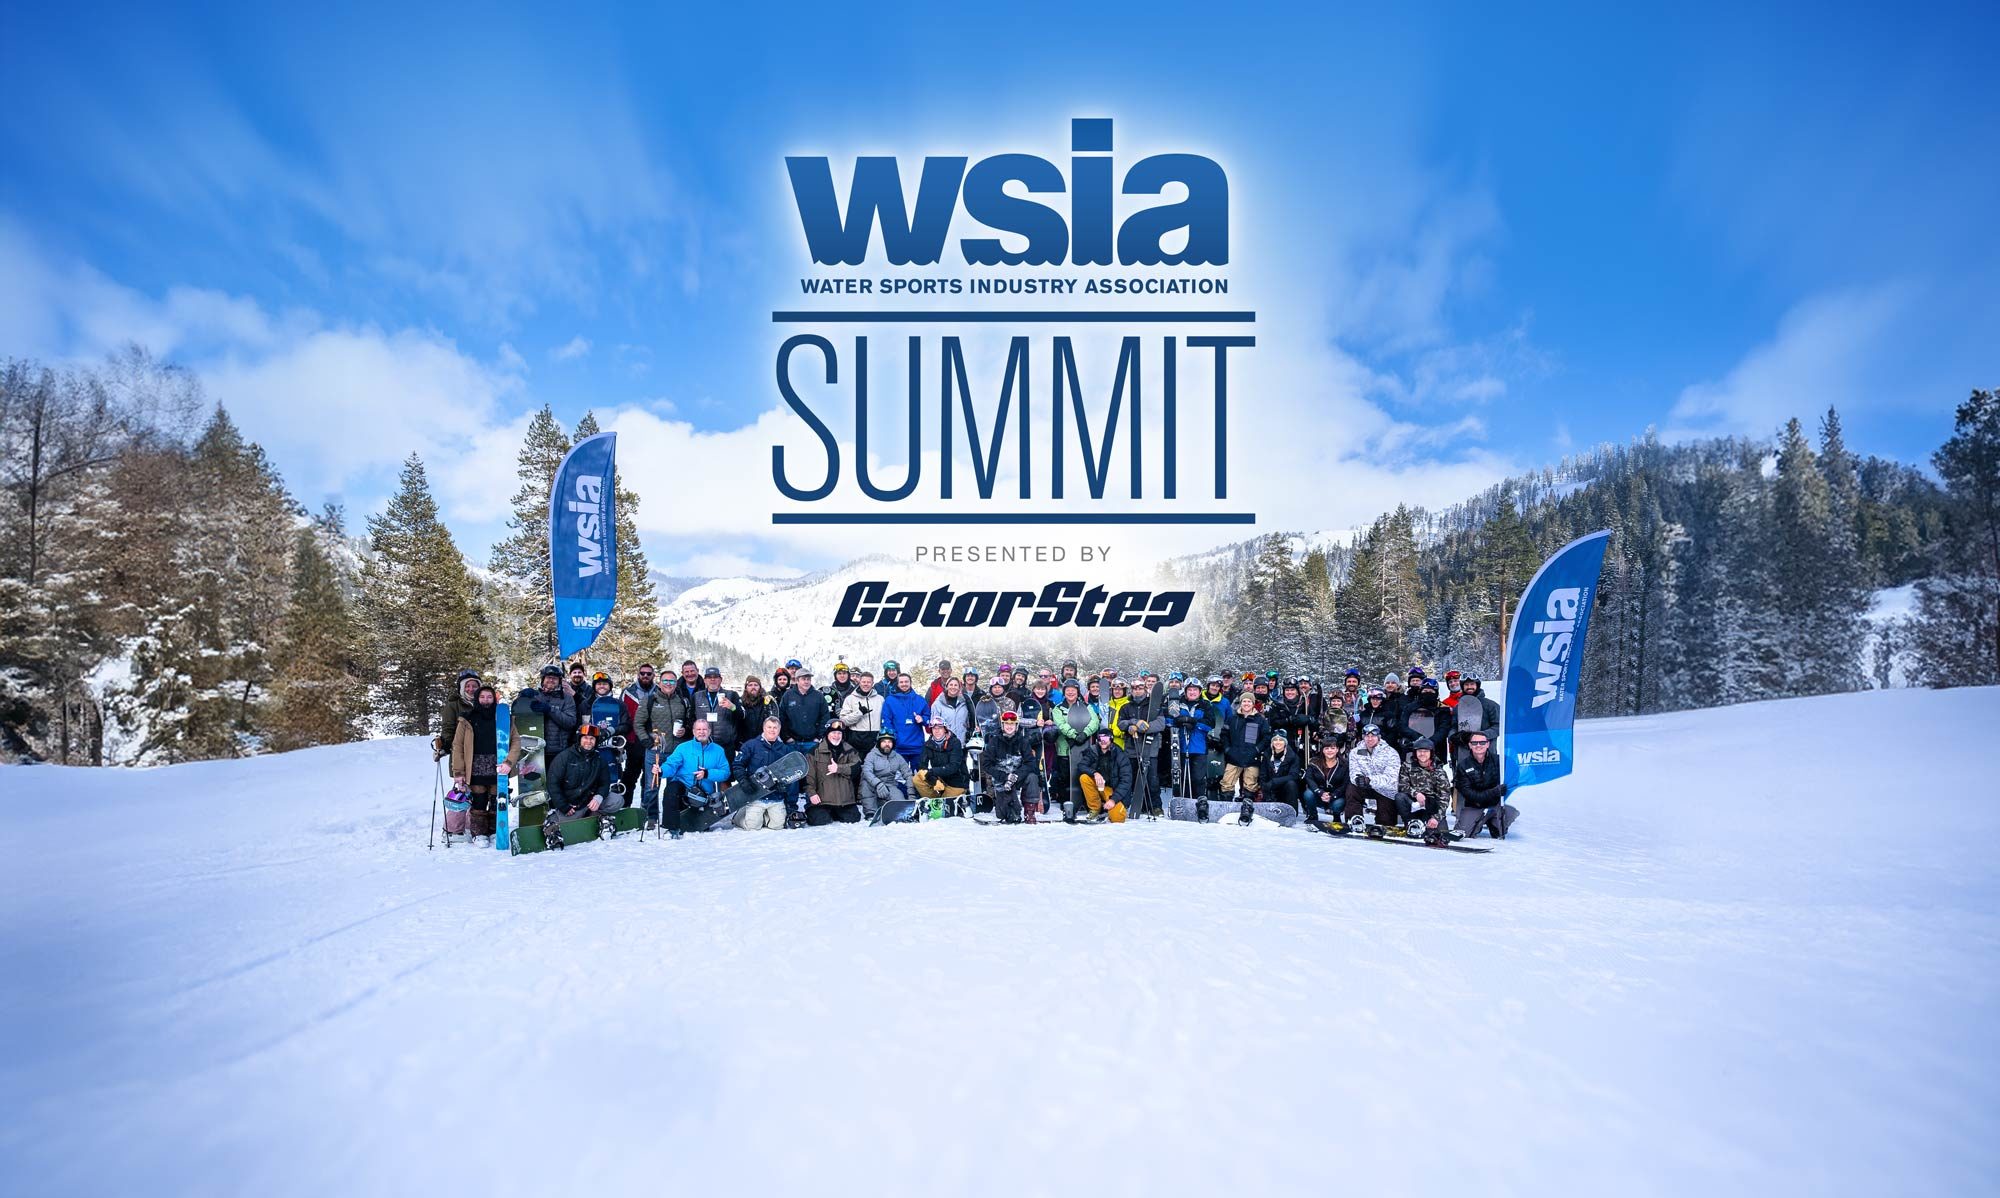 About WSIA SUMMIT